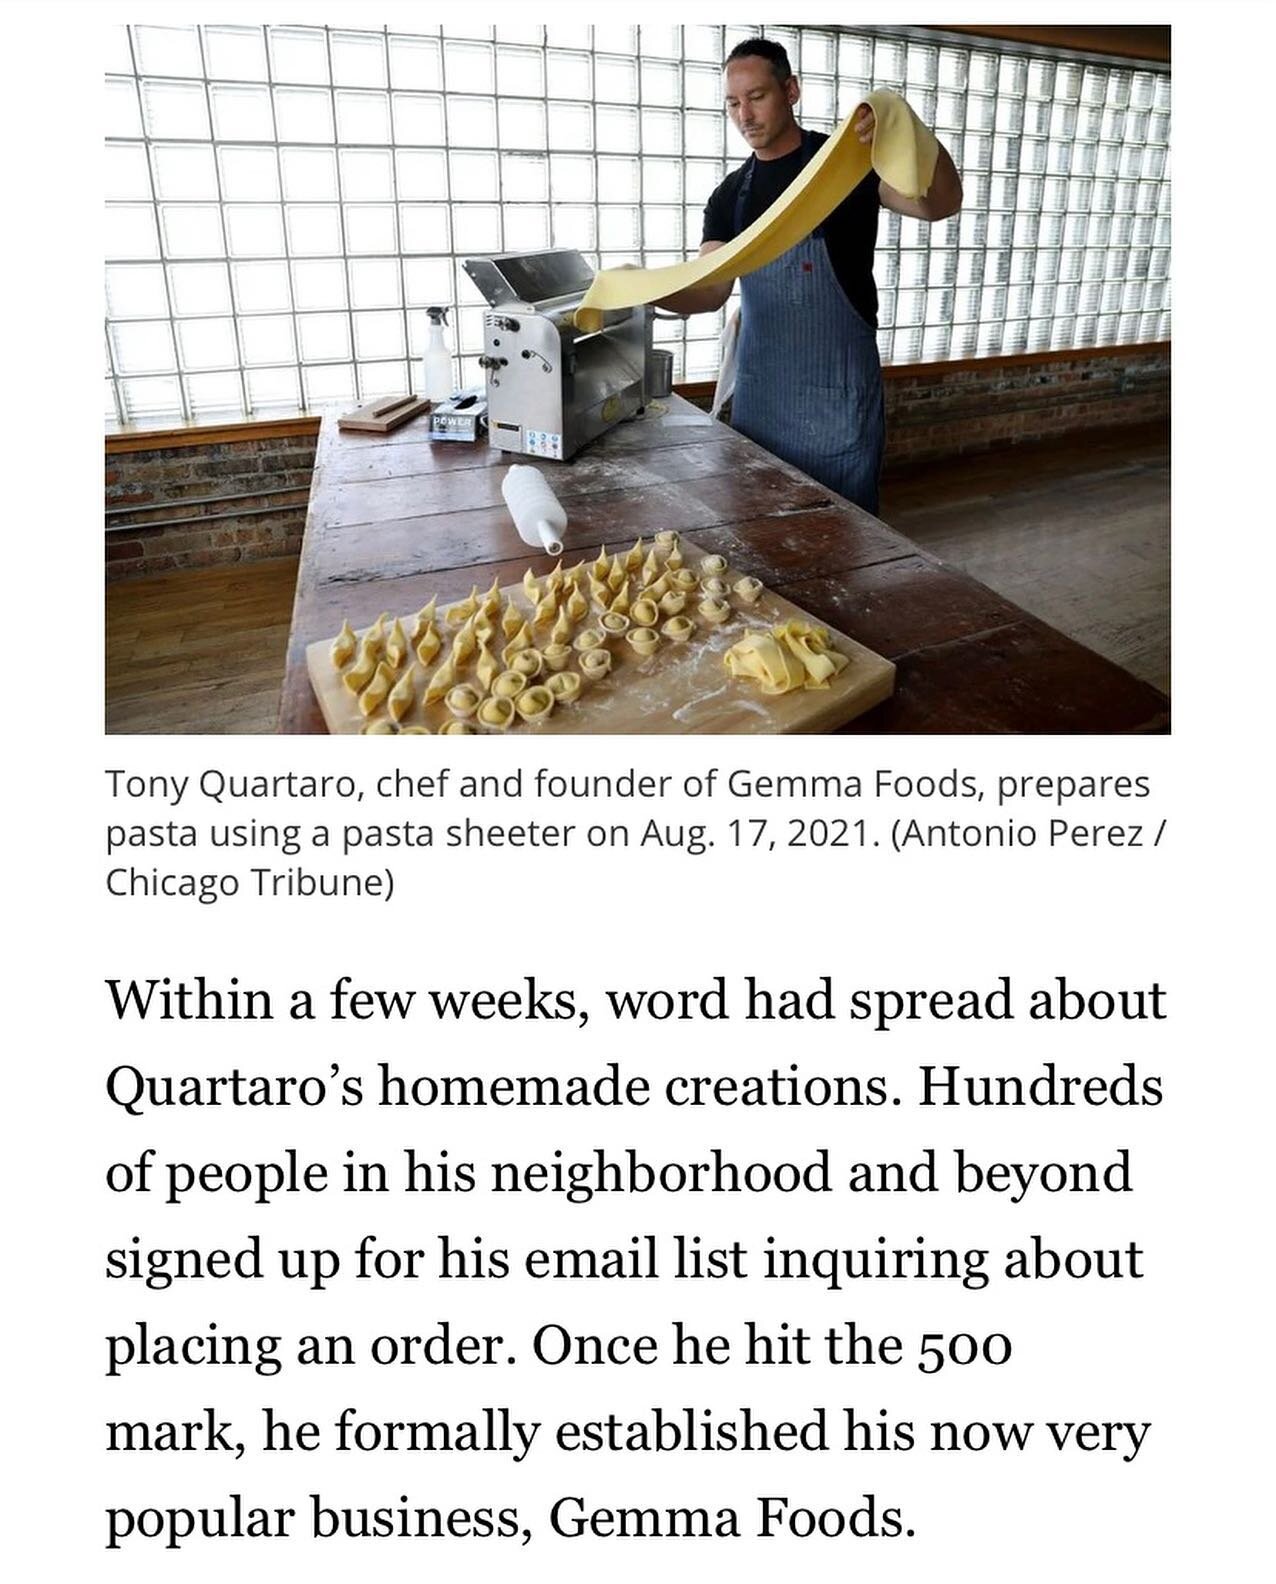 We know where we're going when our next pasta craving hits! Congrats to @GemmaFoods on being highlighted in this great feature in the @chicagotribune 
#kitchenchicago #gemmafoods #sharedkitchen #supportsmallbusiness
.
.
.
.
#forkyeah #EEEEEats #infat